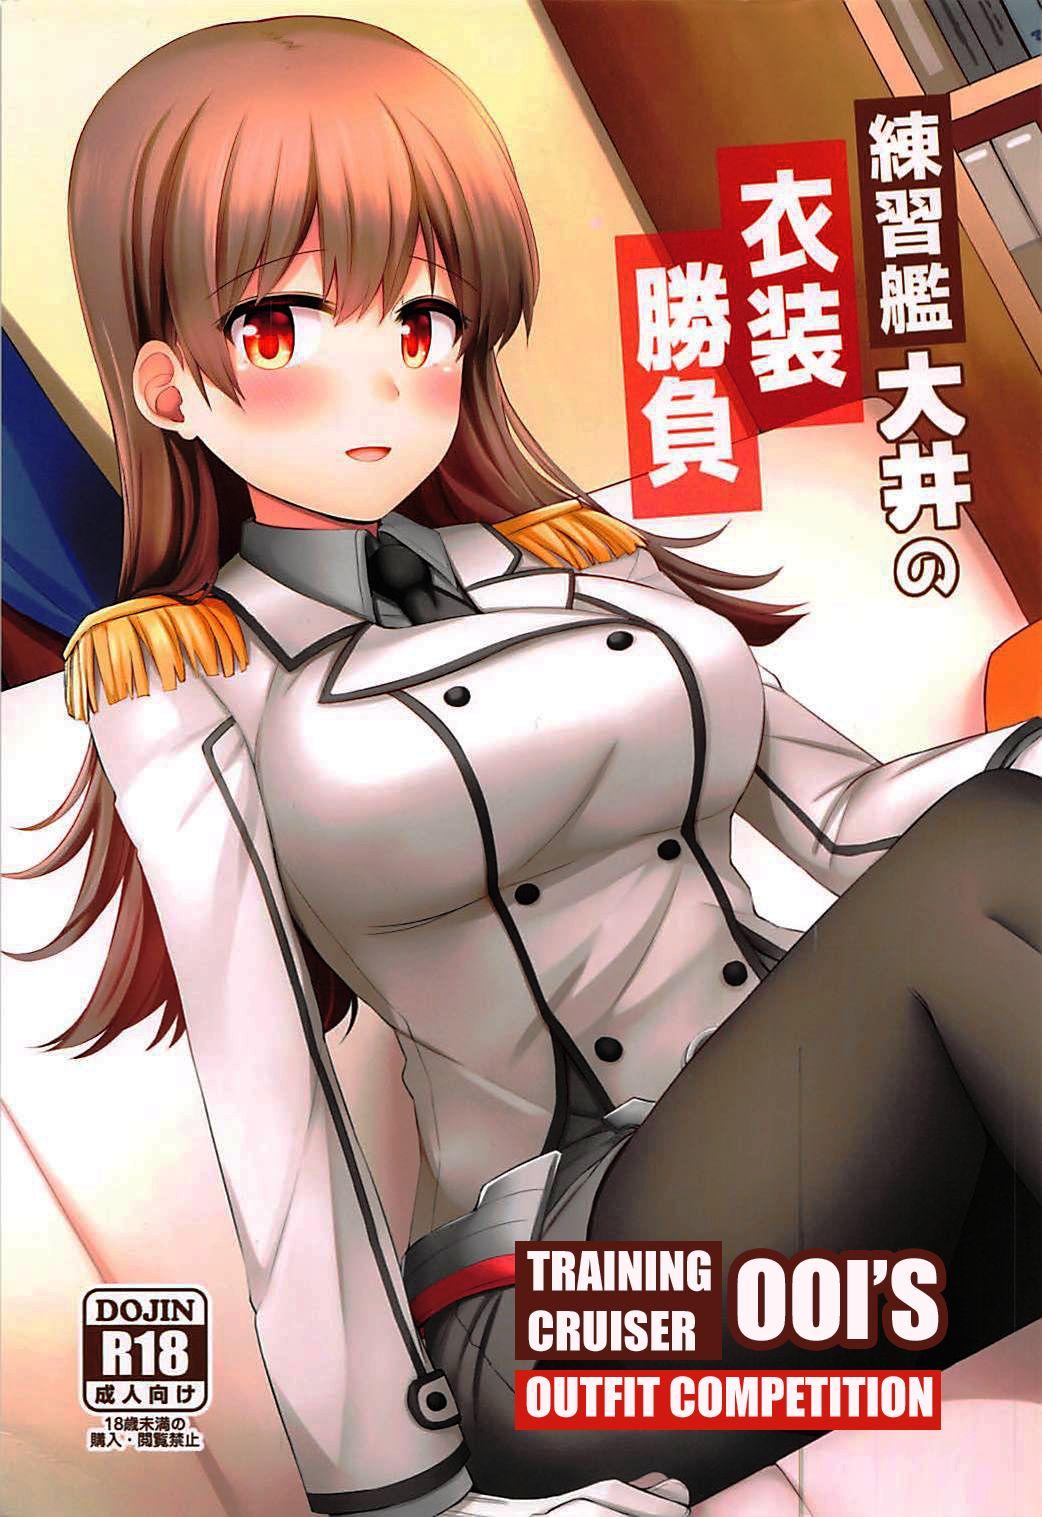 Usa Renshuukan Ooi no Ishou Shoubu | Training Cruiser Ooi's Outfit Competition - Kantai collection Jap - Picture 1